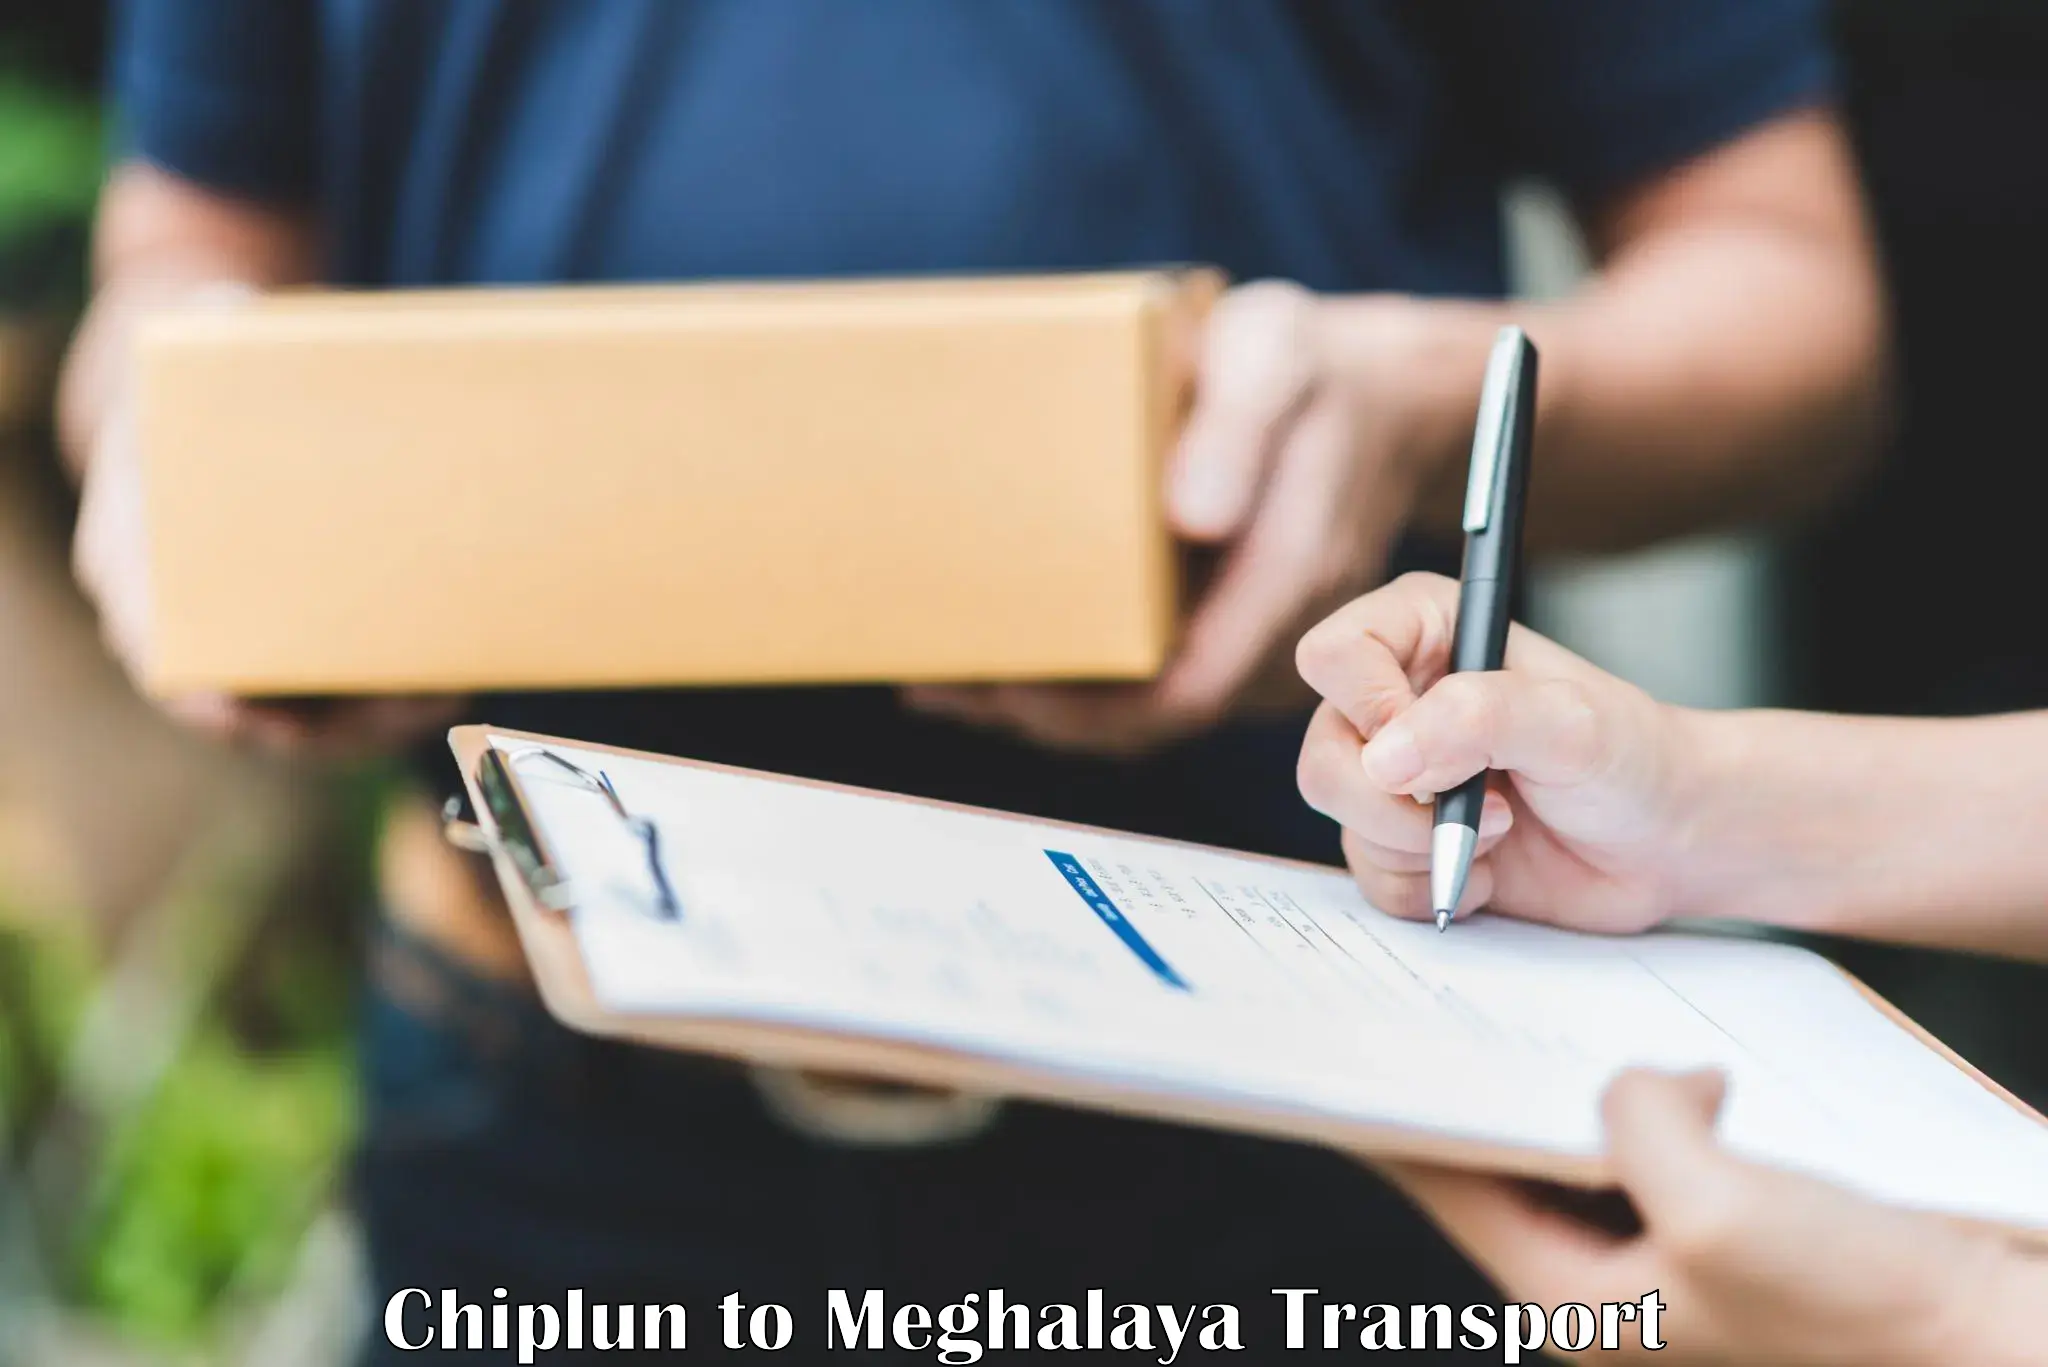 Domestic goods transportation services Chiplun to Shillong